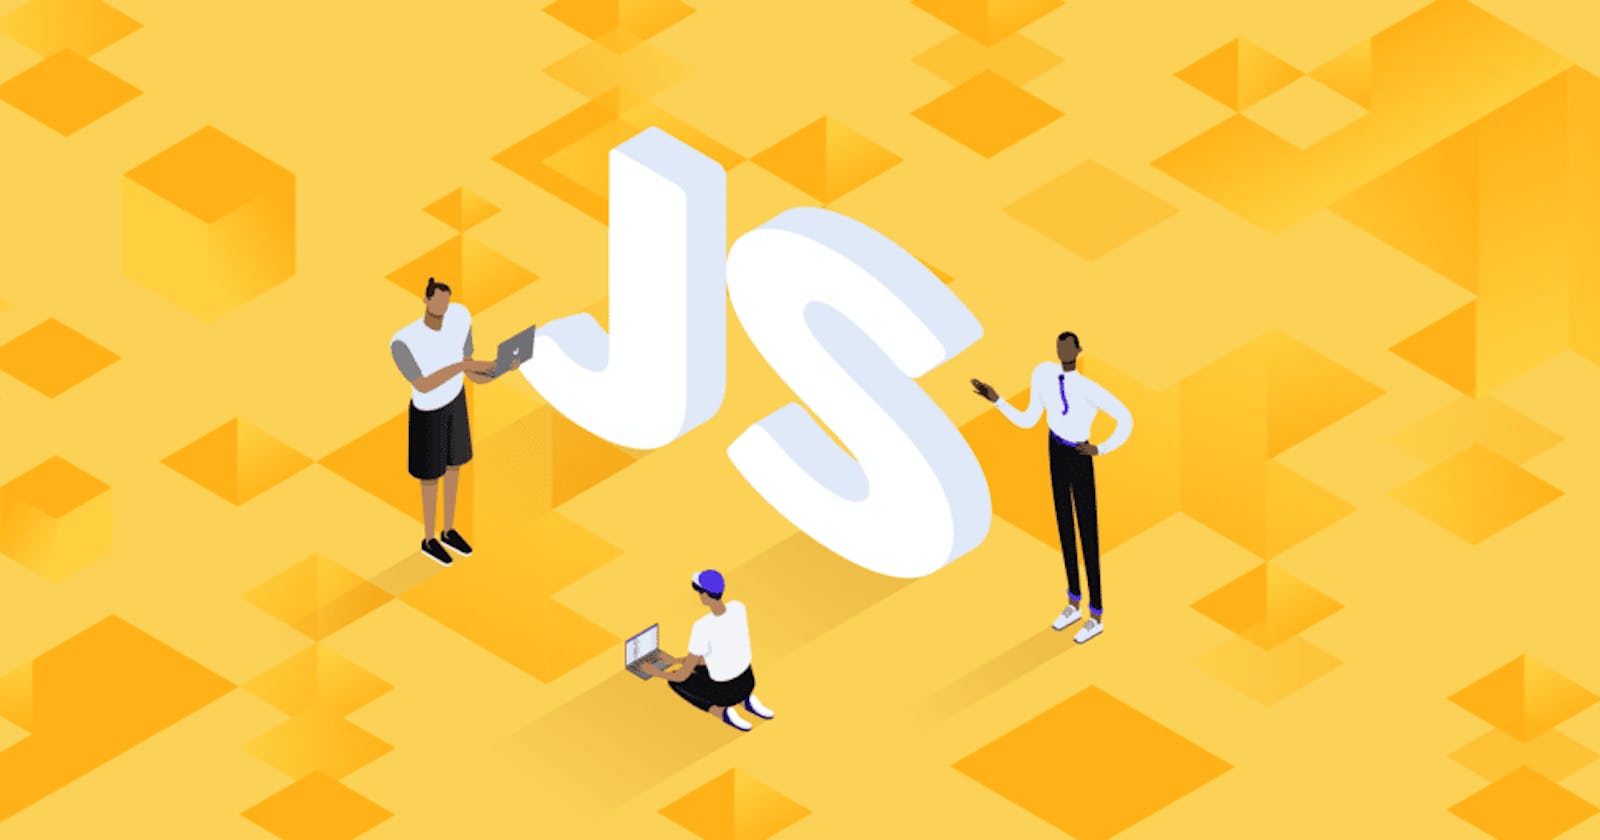 Learn Creational JavaScript Design Patterns with This Easy Guide